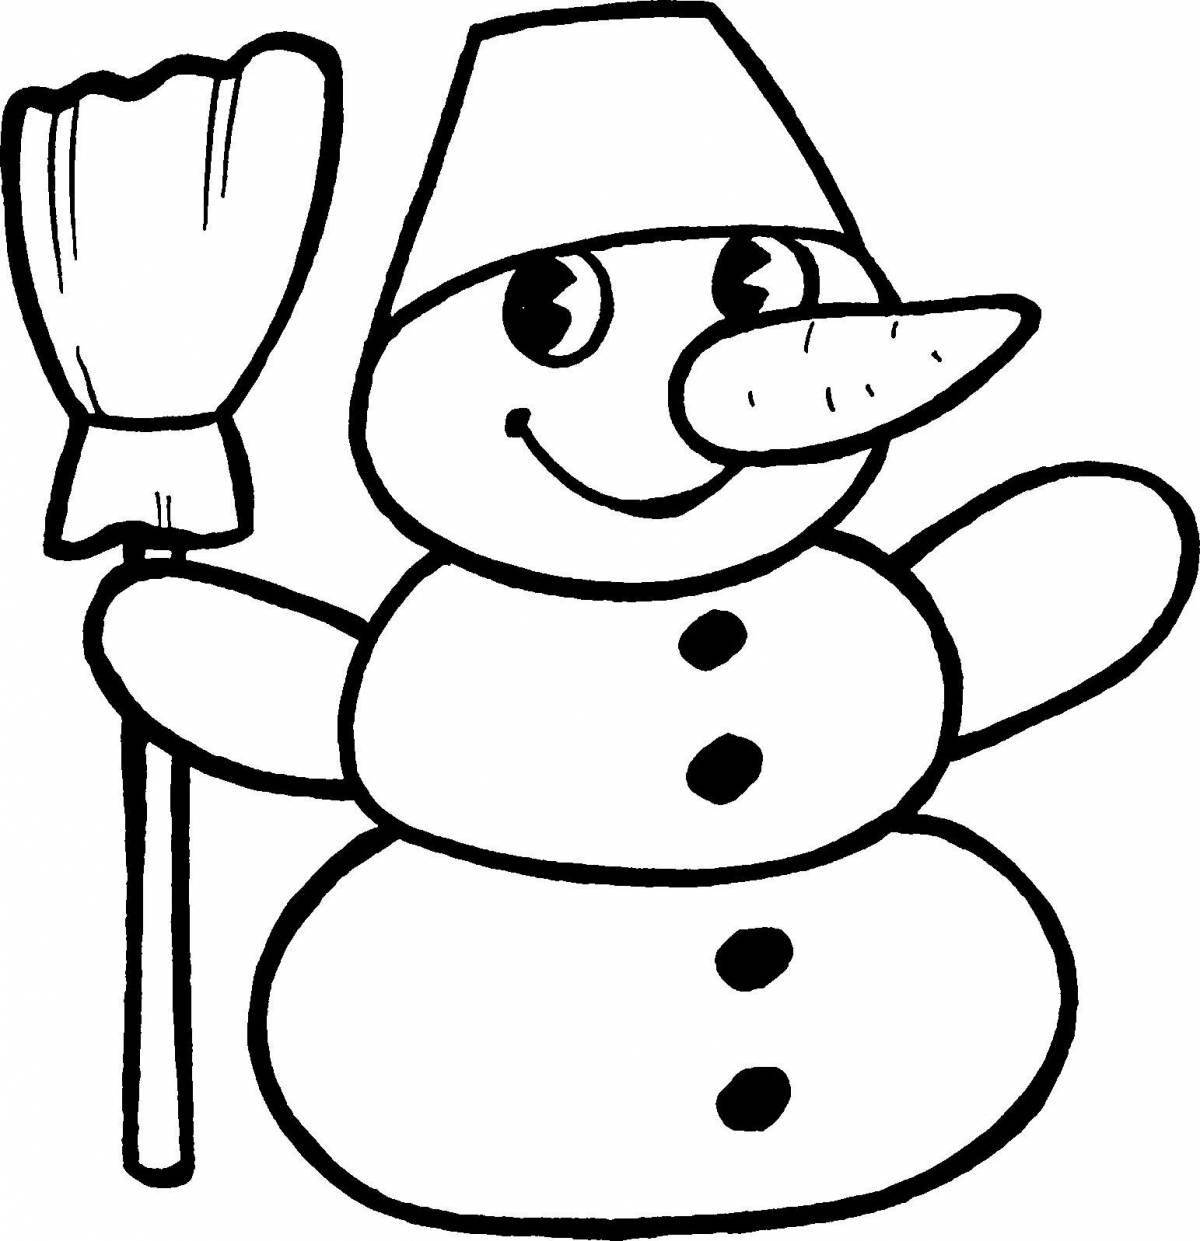 Animated snowman birthday coloring book